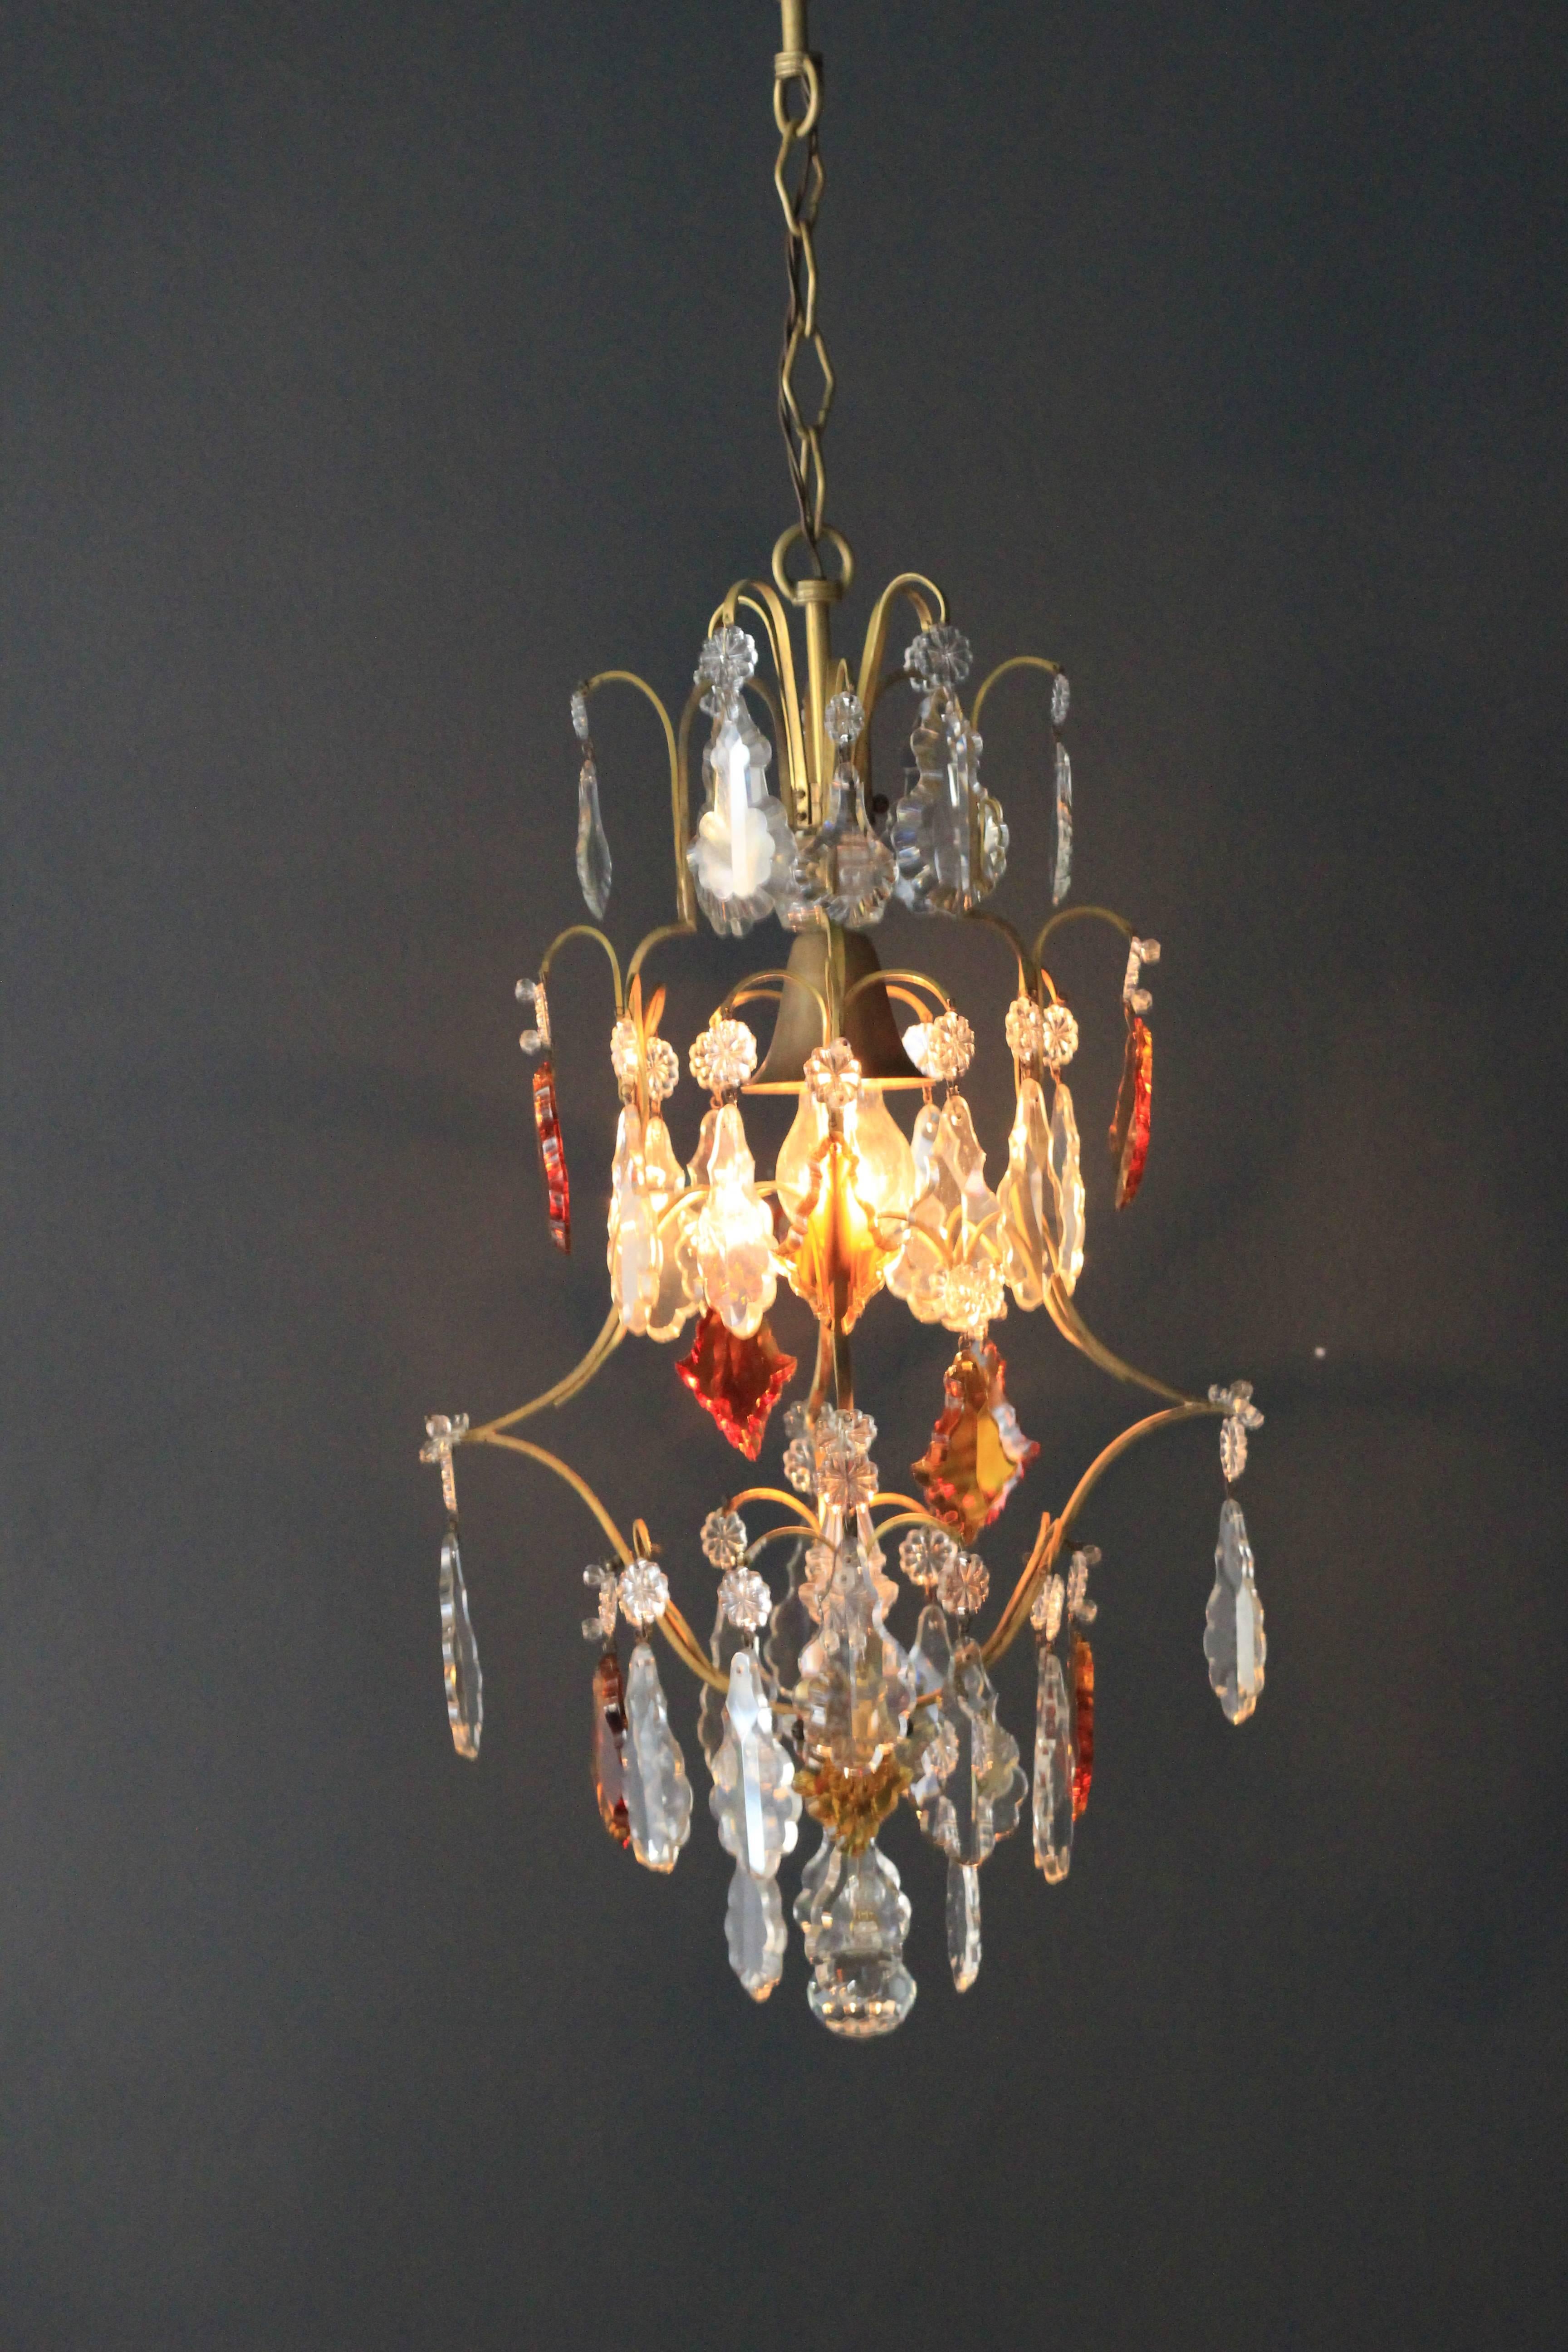 Small fine colored crystal chandelier

Crystal chandelier old ceiling brass brown colorful special amber color lustre

Measures: Total height 75cm, height without chain 50cm, diameter 30cm weight (approximately): 3kg

Number of lights: one